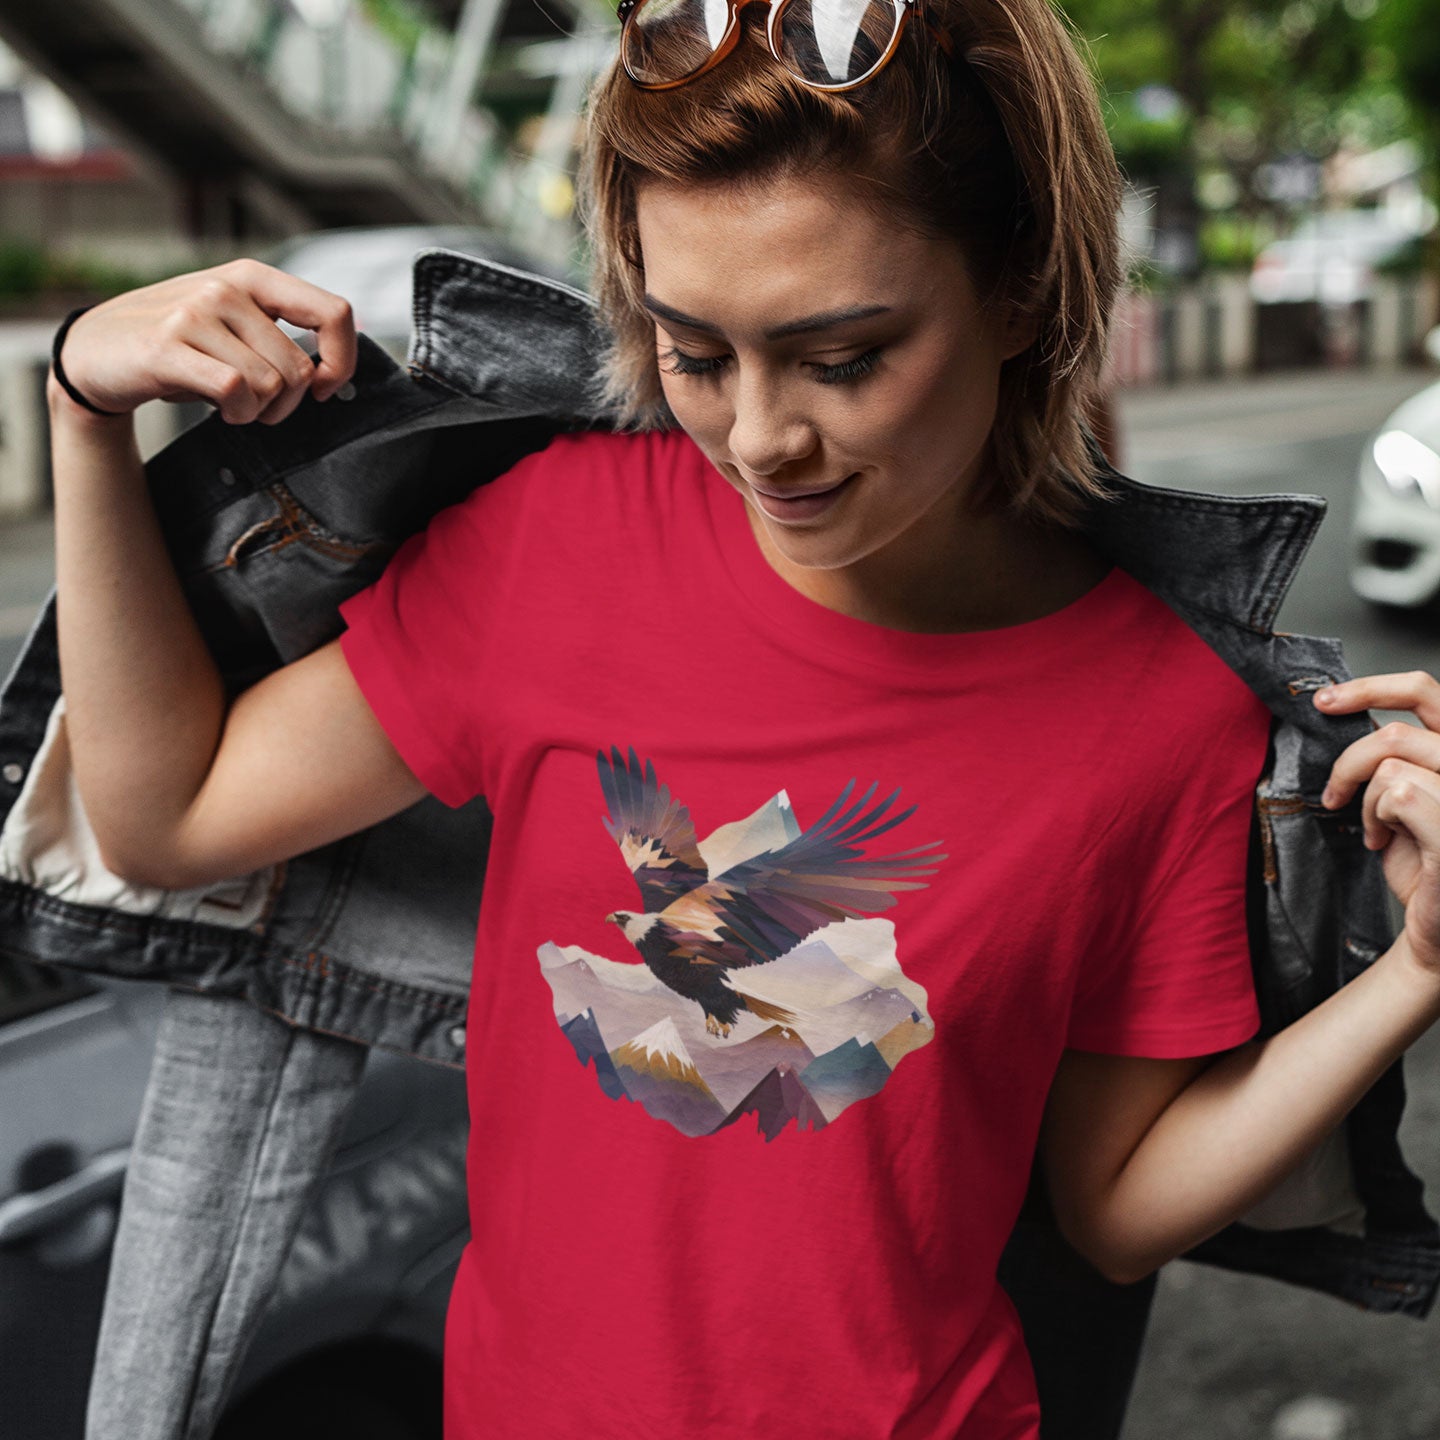 woman wearing a red t-shirt with an eagle flying over a mountain range print